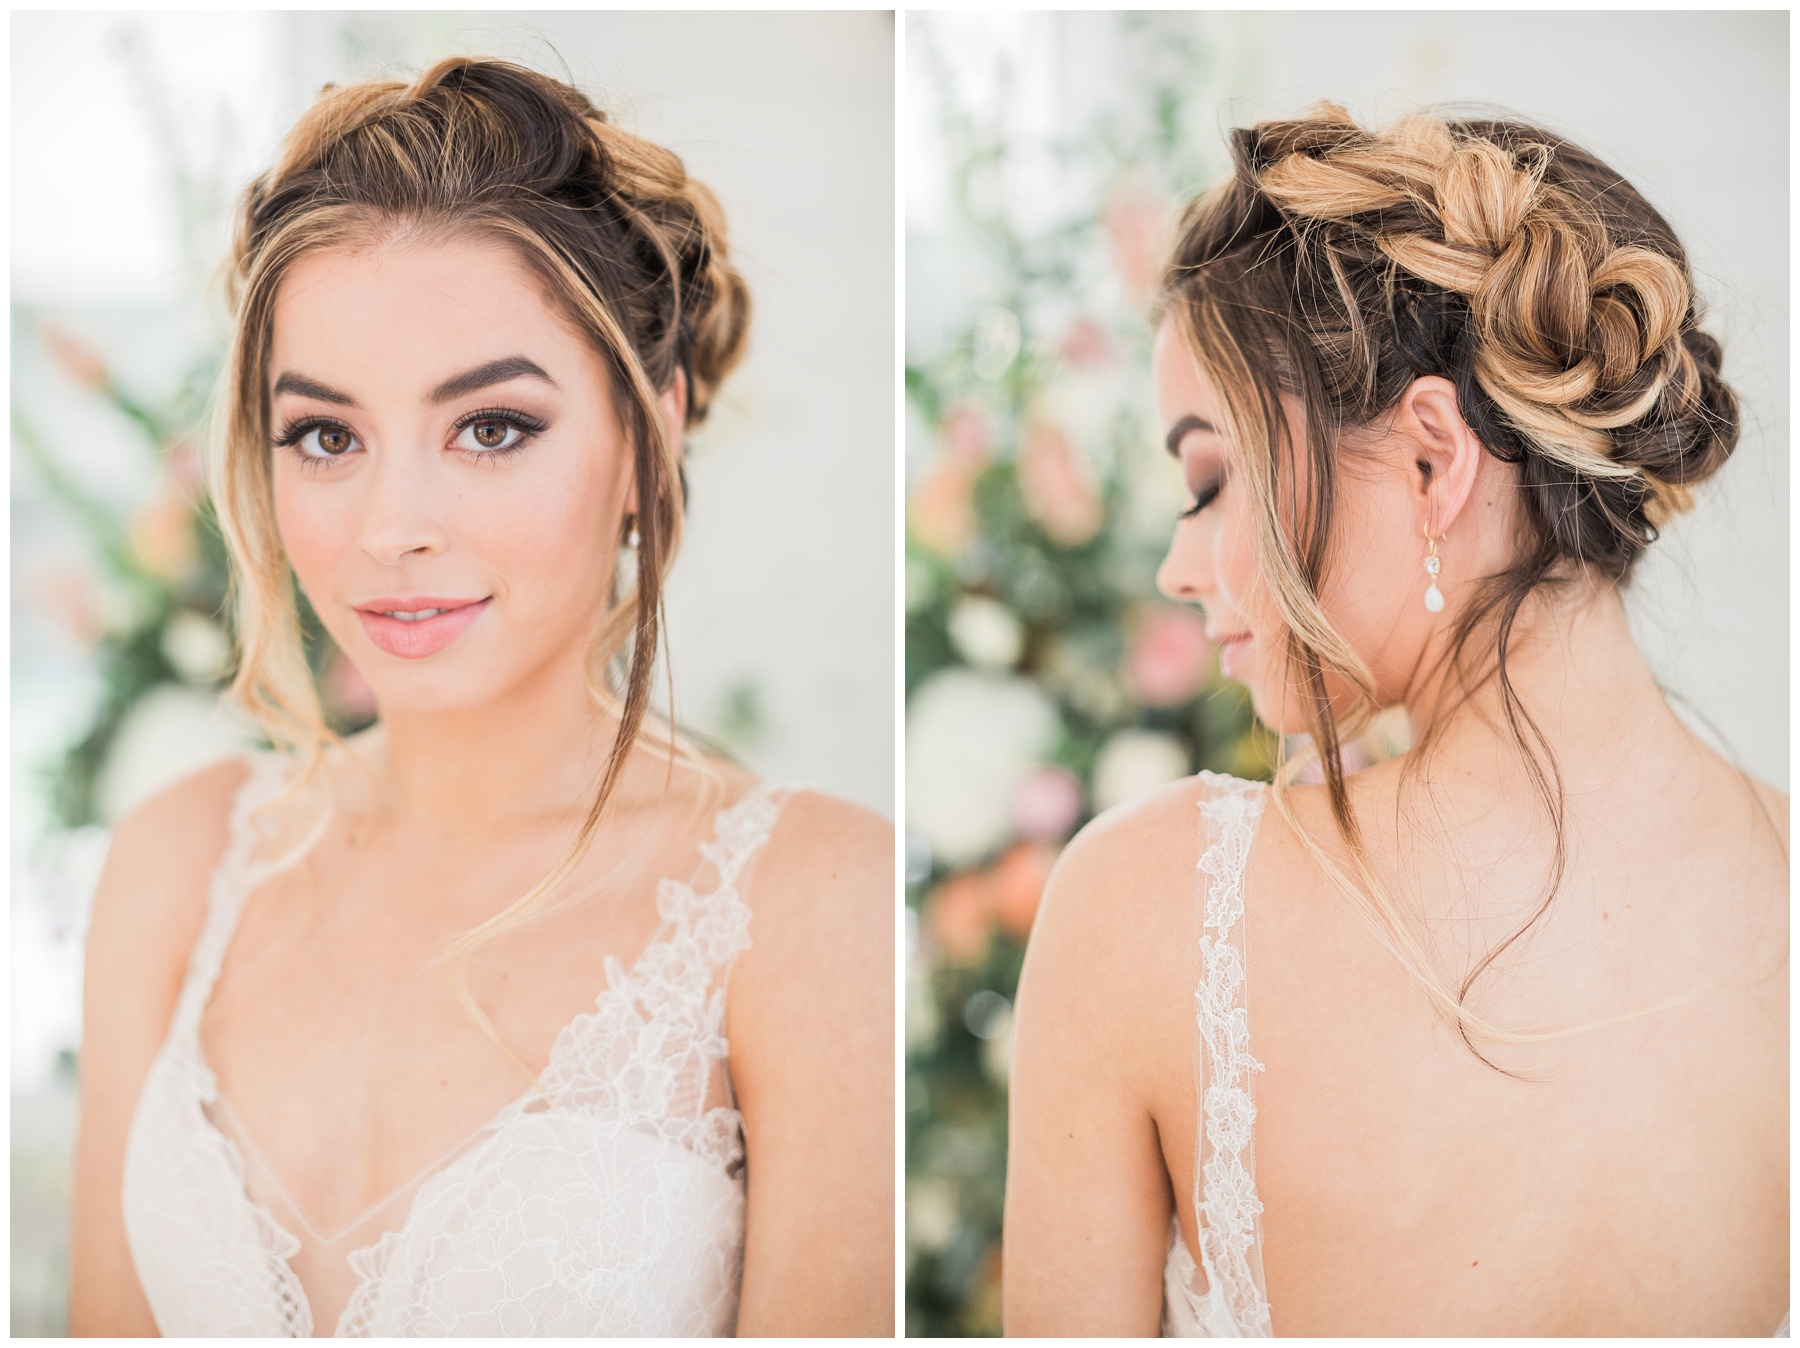 Bride with a milkmaid braid and natural makeup